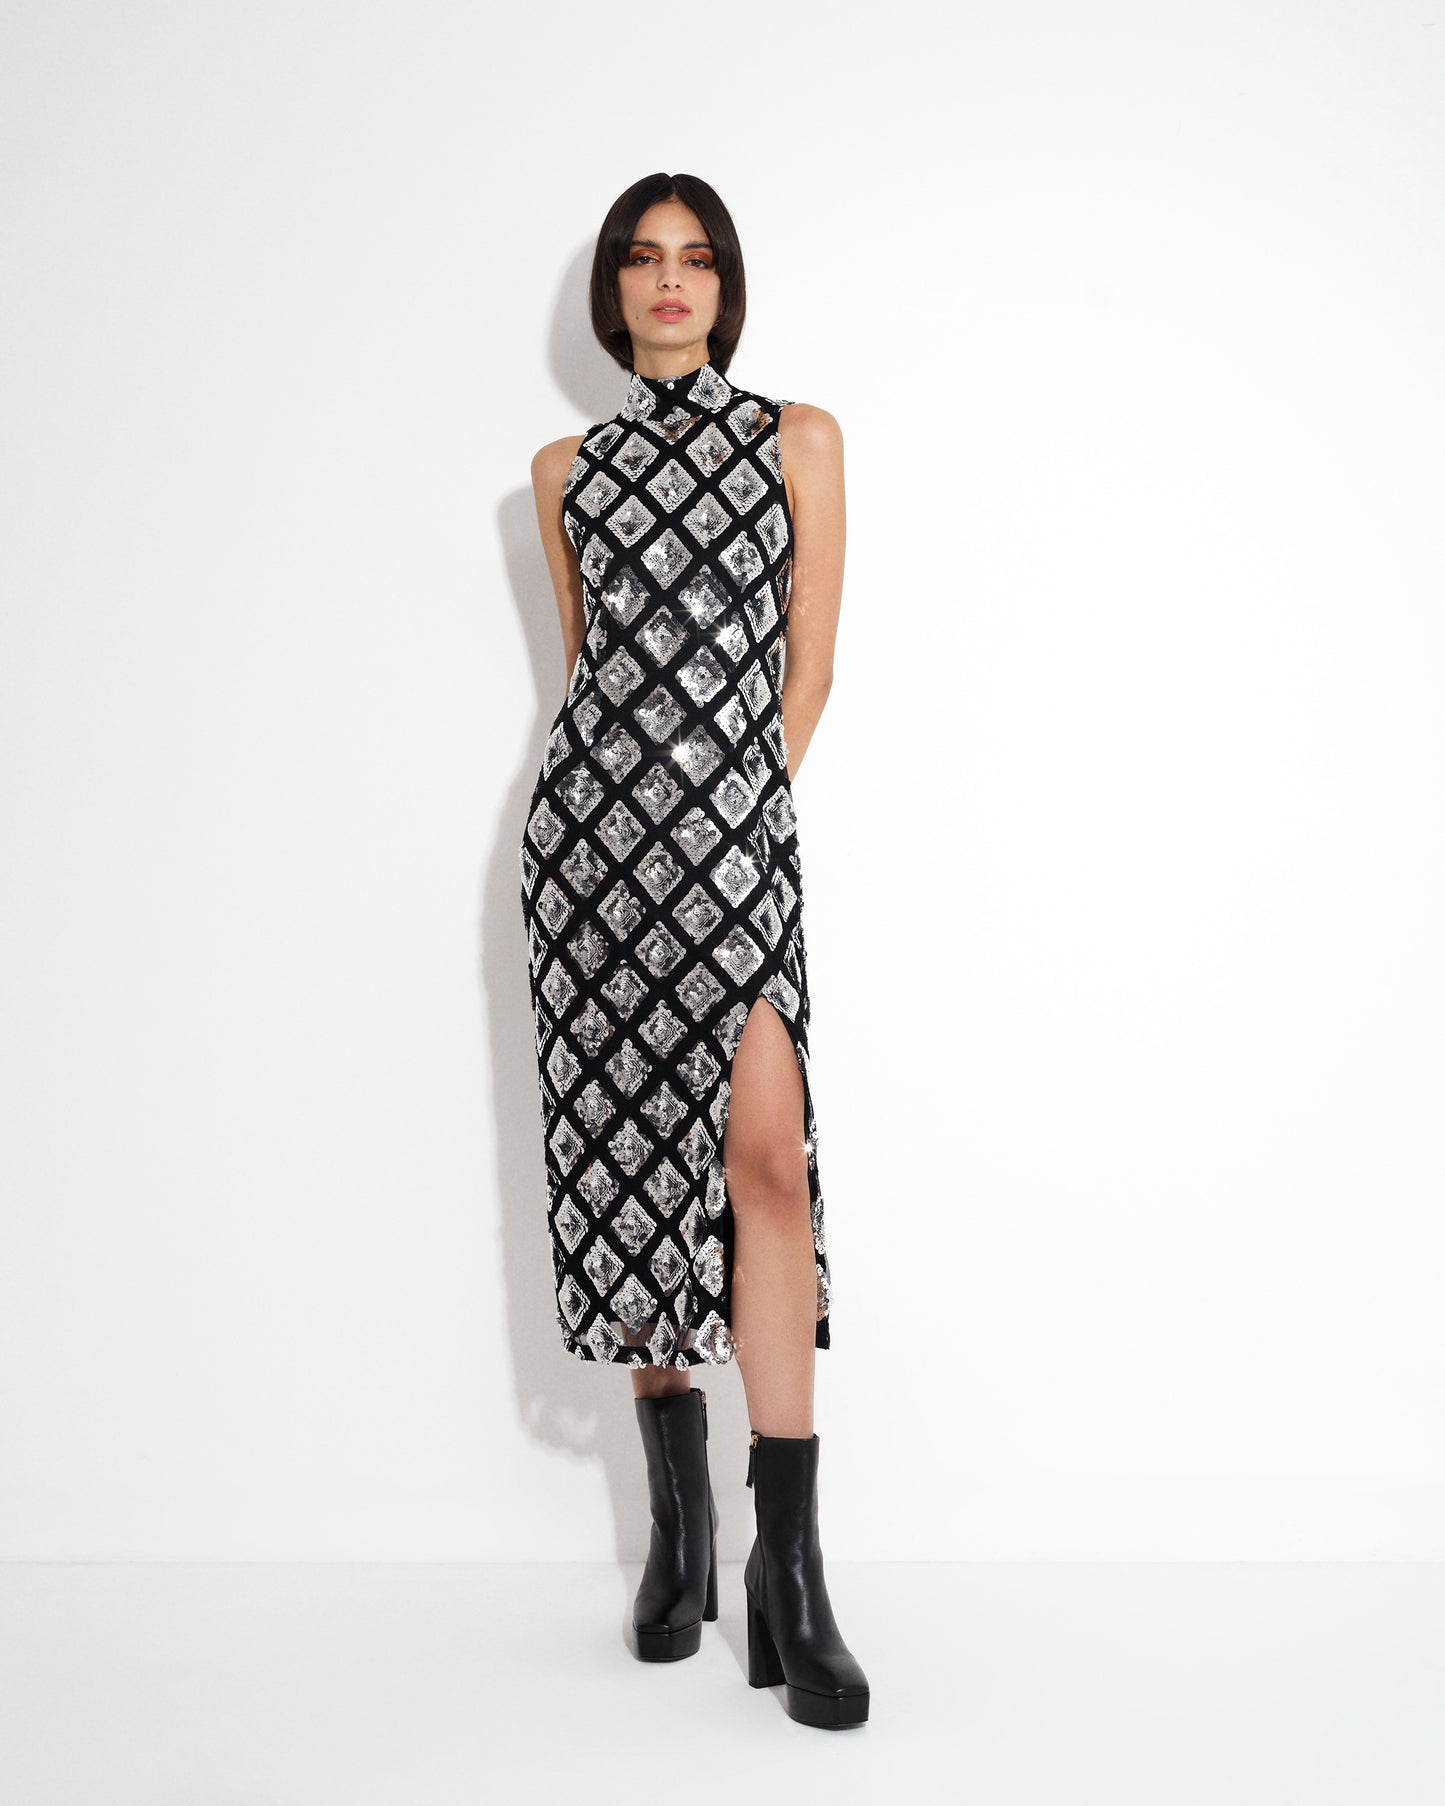 Axel Embellished Dress - French Connection